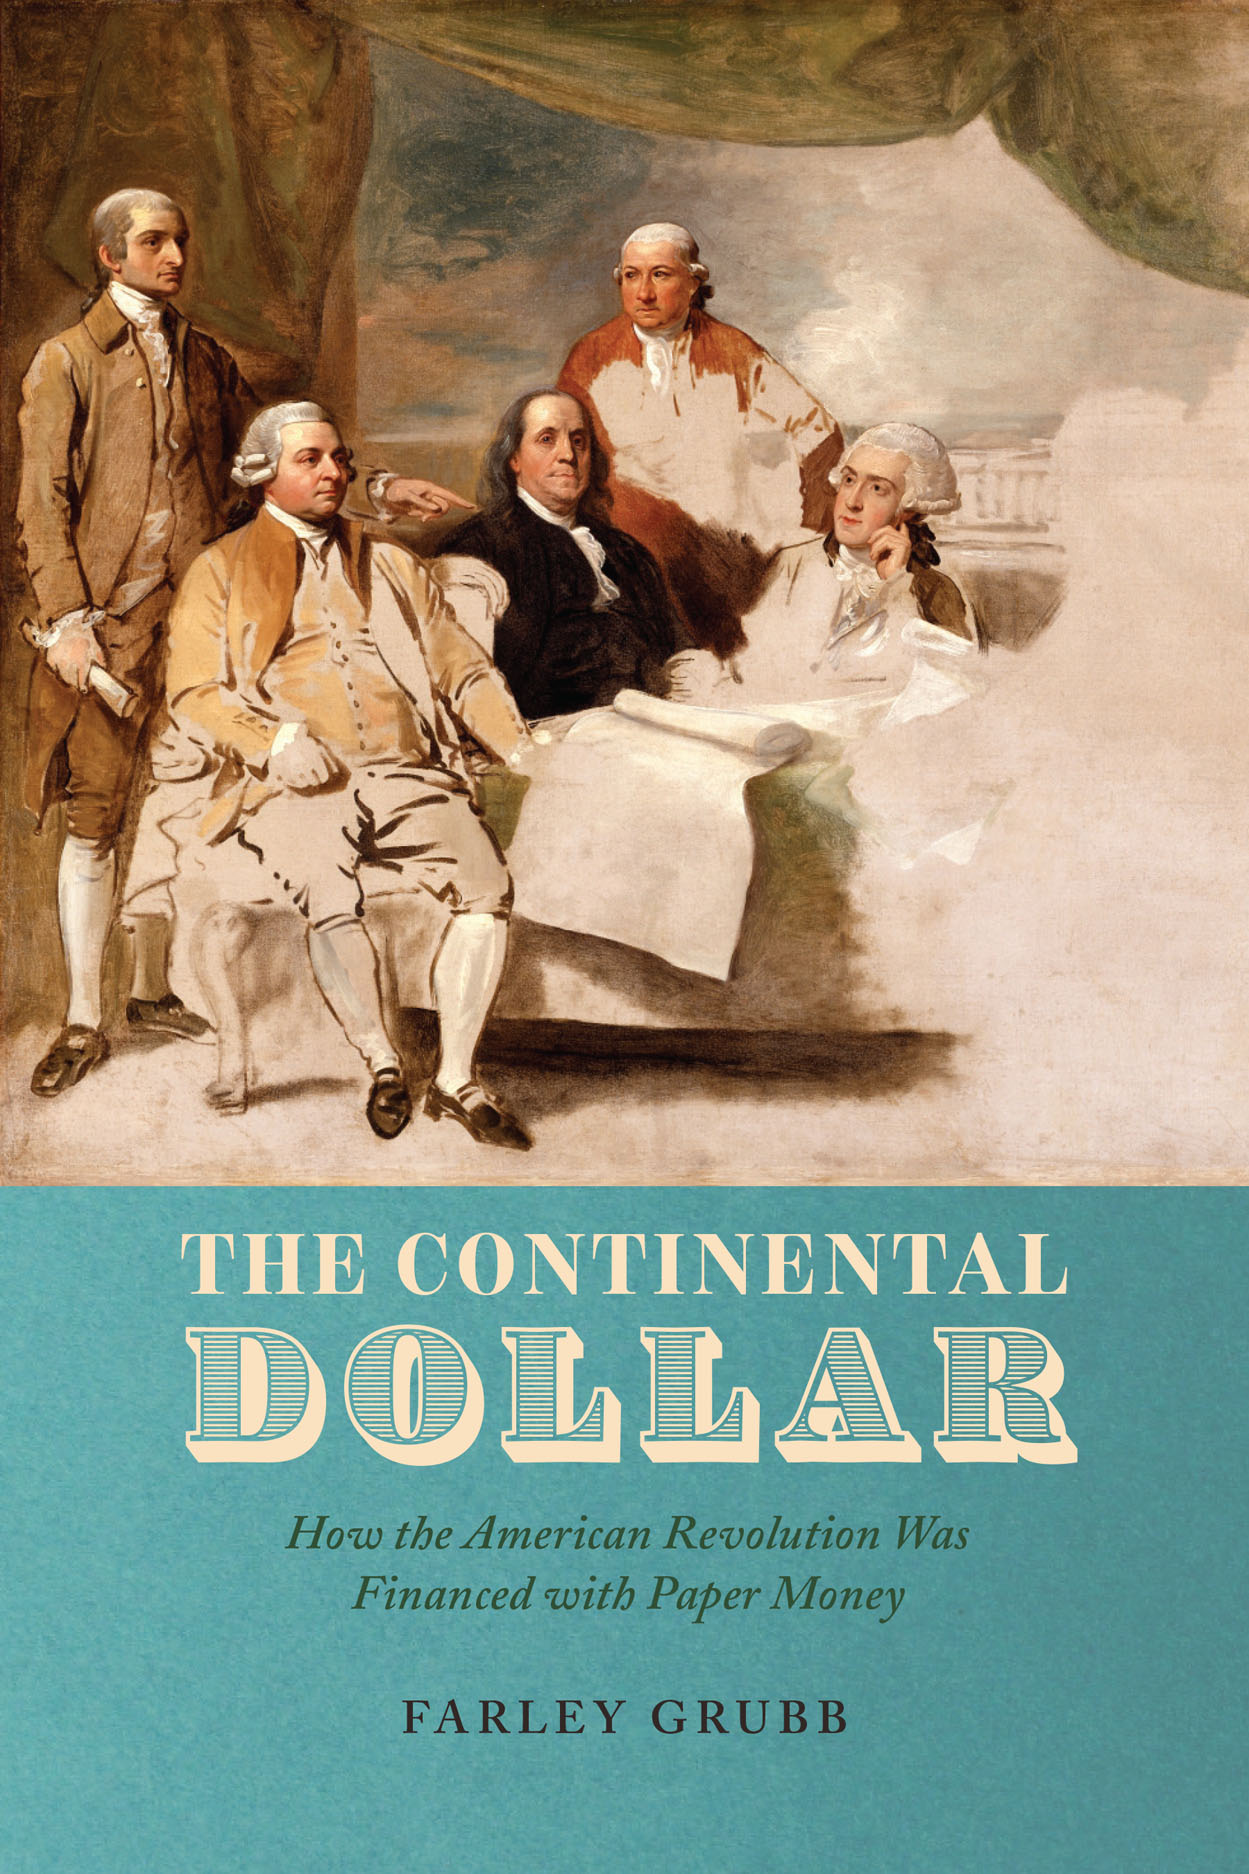 The Continental Dollar: How the American Revolution Was Financed